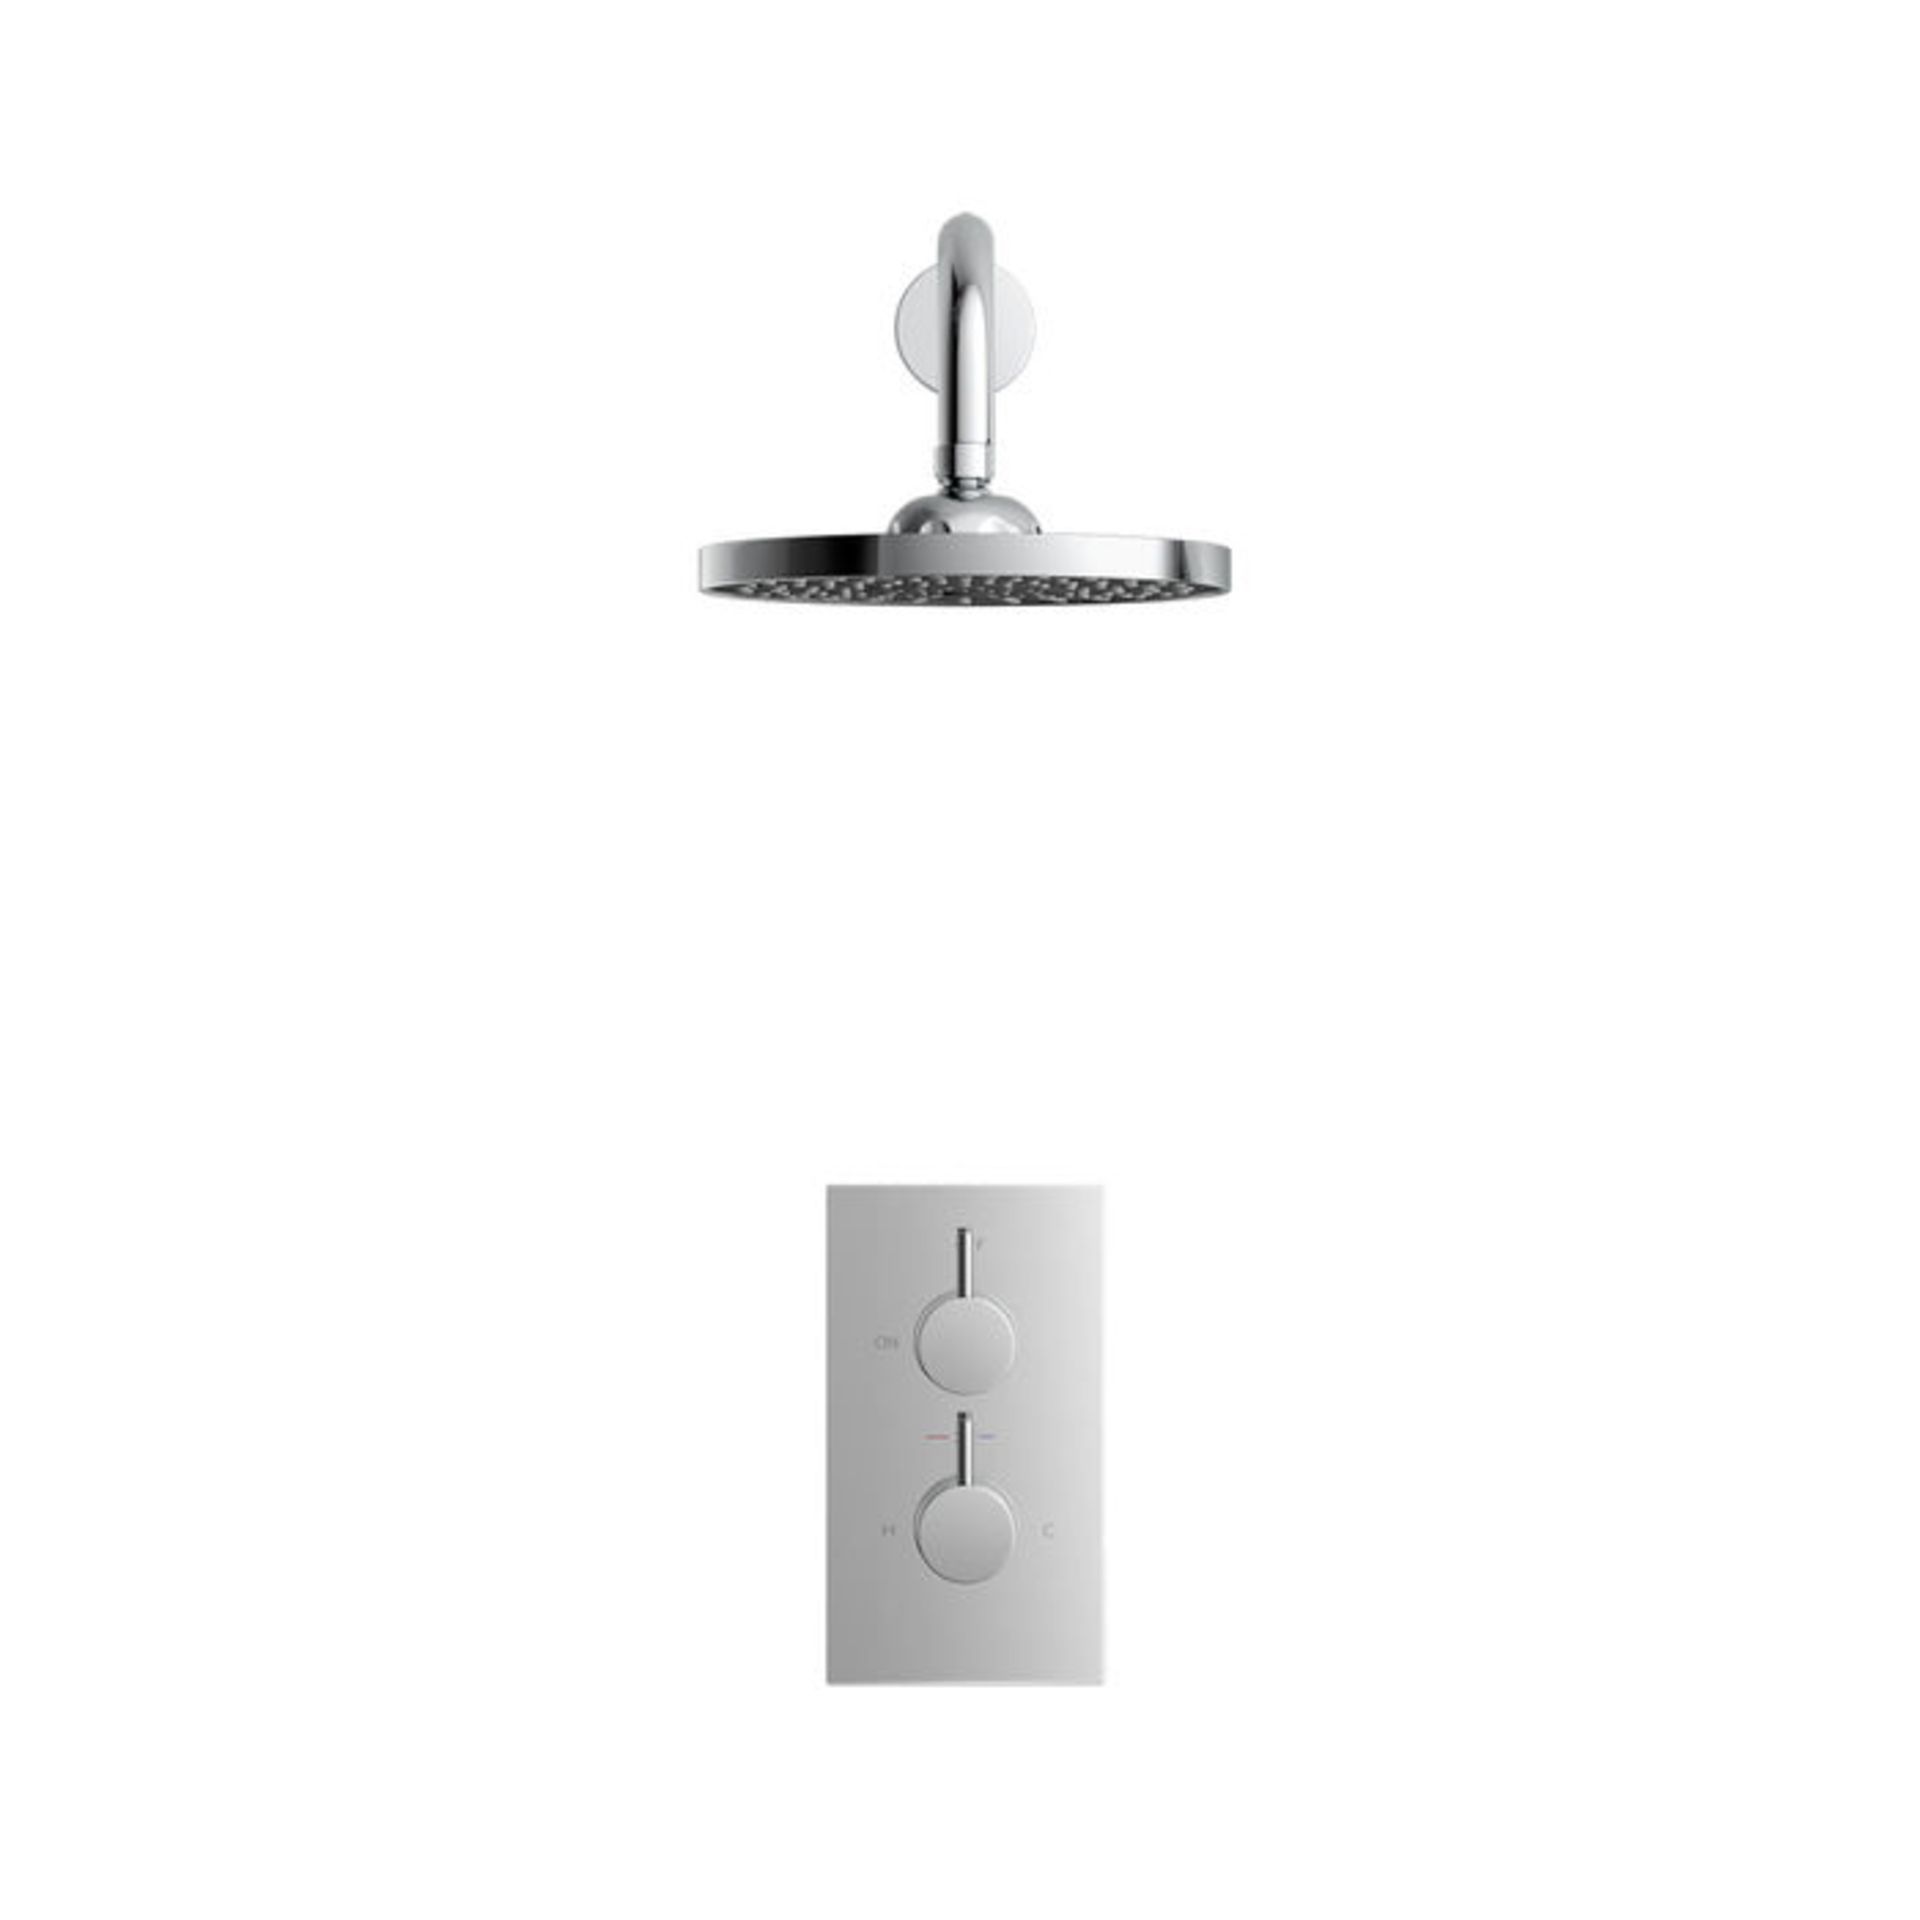 (CT201) Round Thermostatic Mixer Shower & Head. Enjoy the minimalistic aesthetic of a concealed - Image 2 of 2